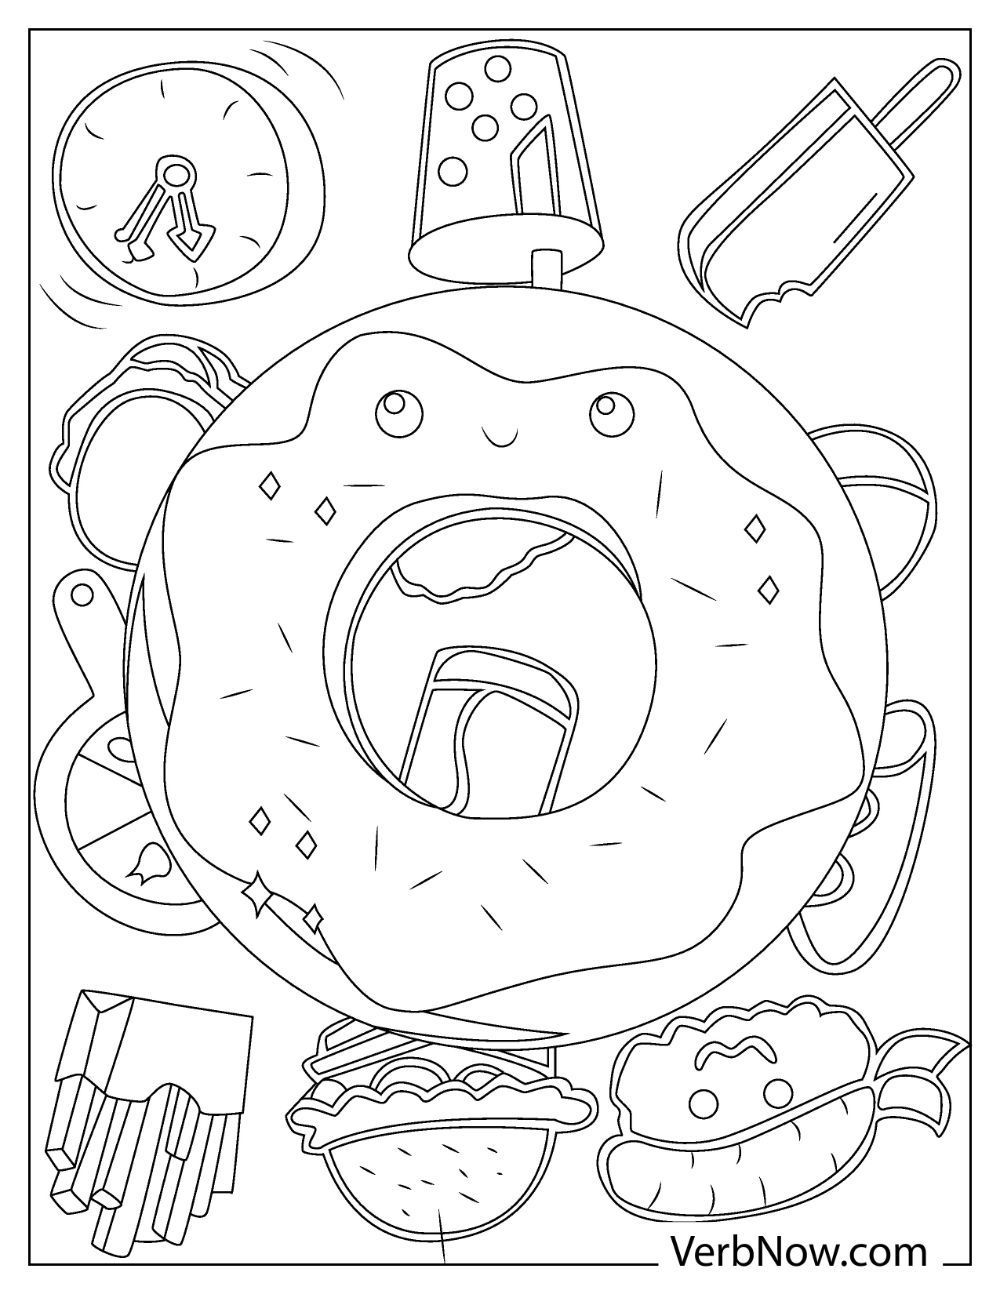 Free CUTE FOOD Coloring Pages & Book for Download (Printable PDF) - VerbNow